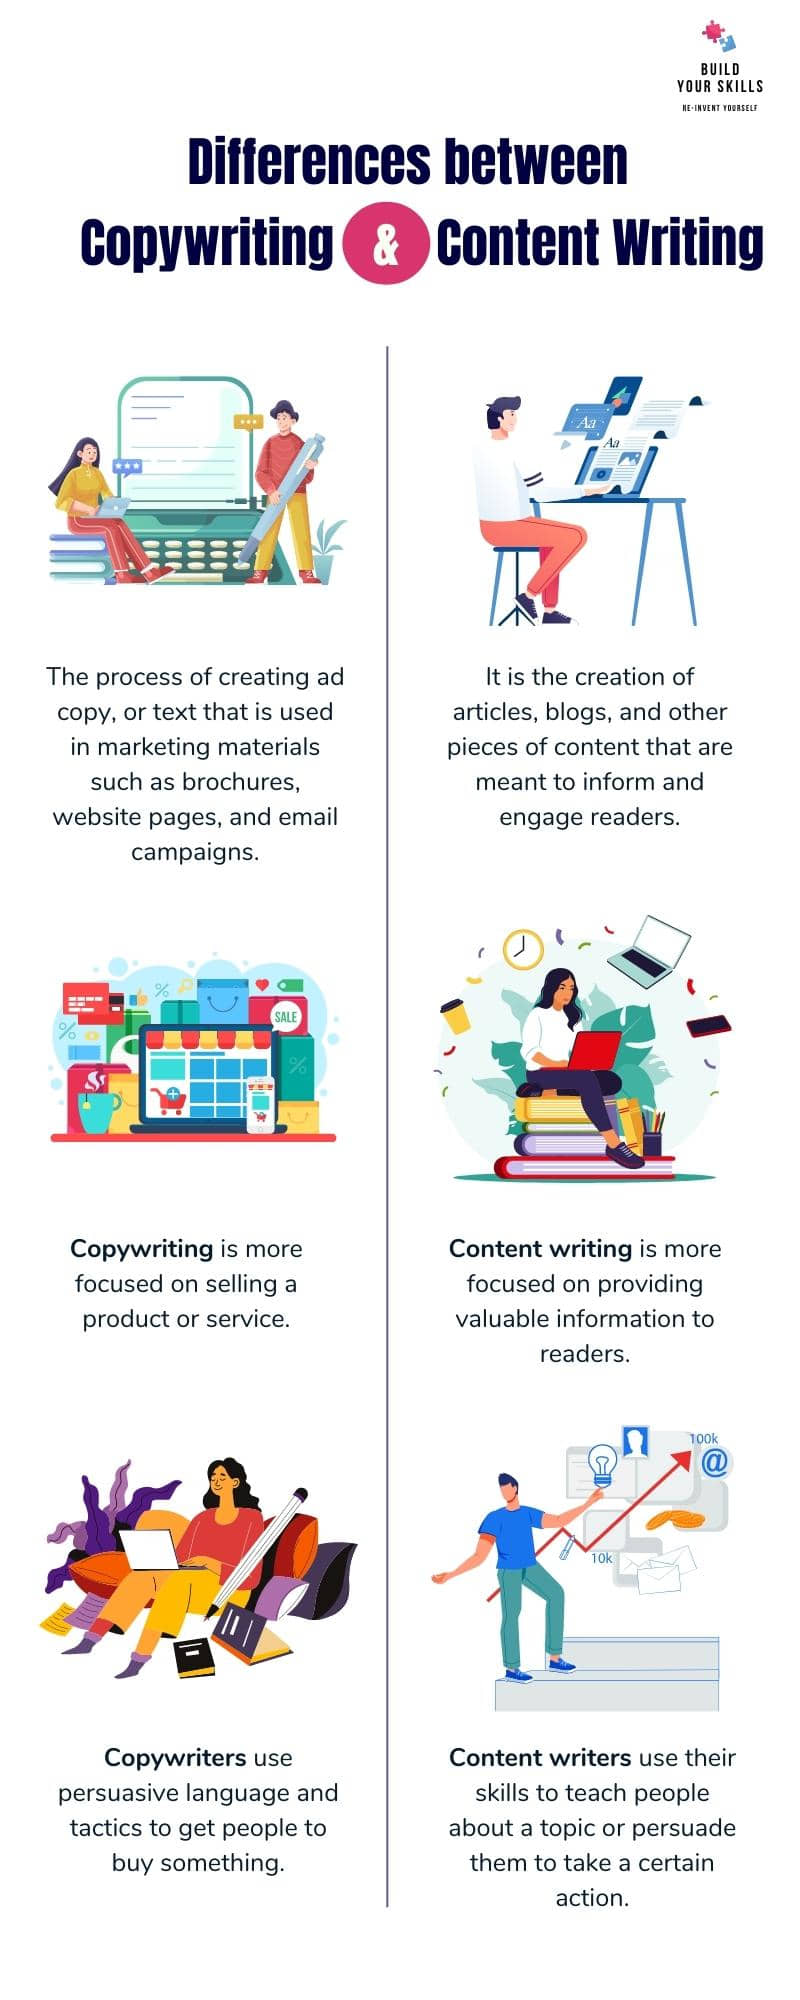 Content writing vs. Content marketing